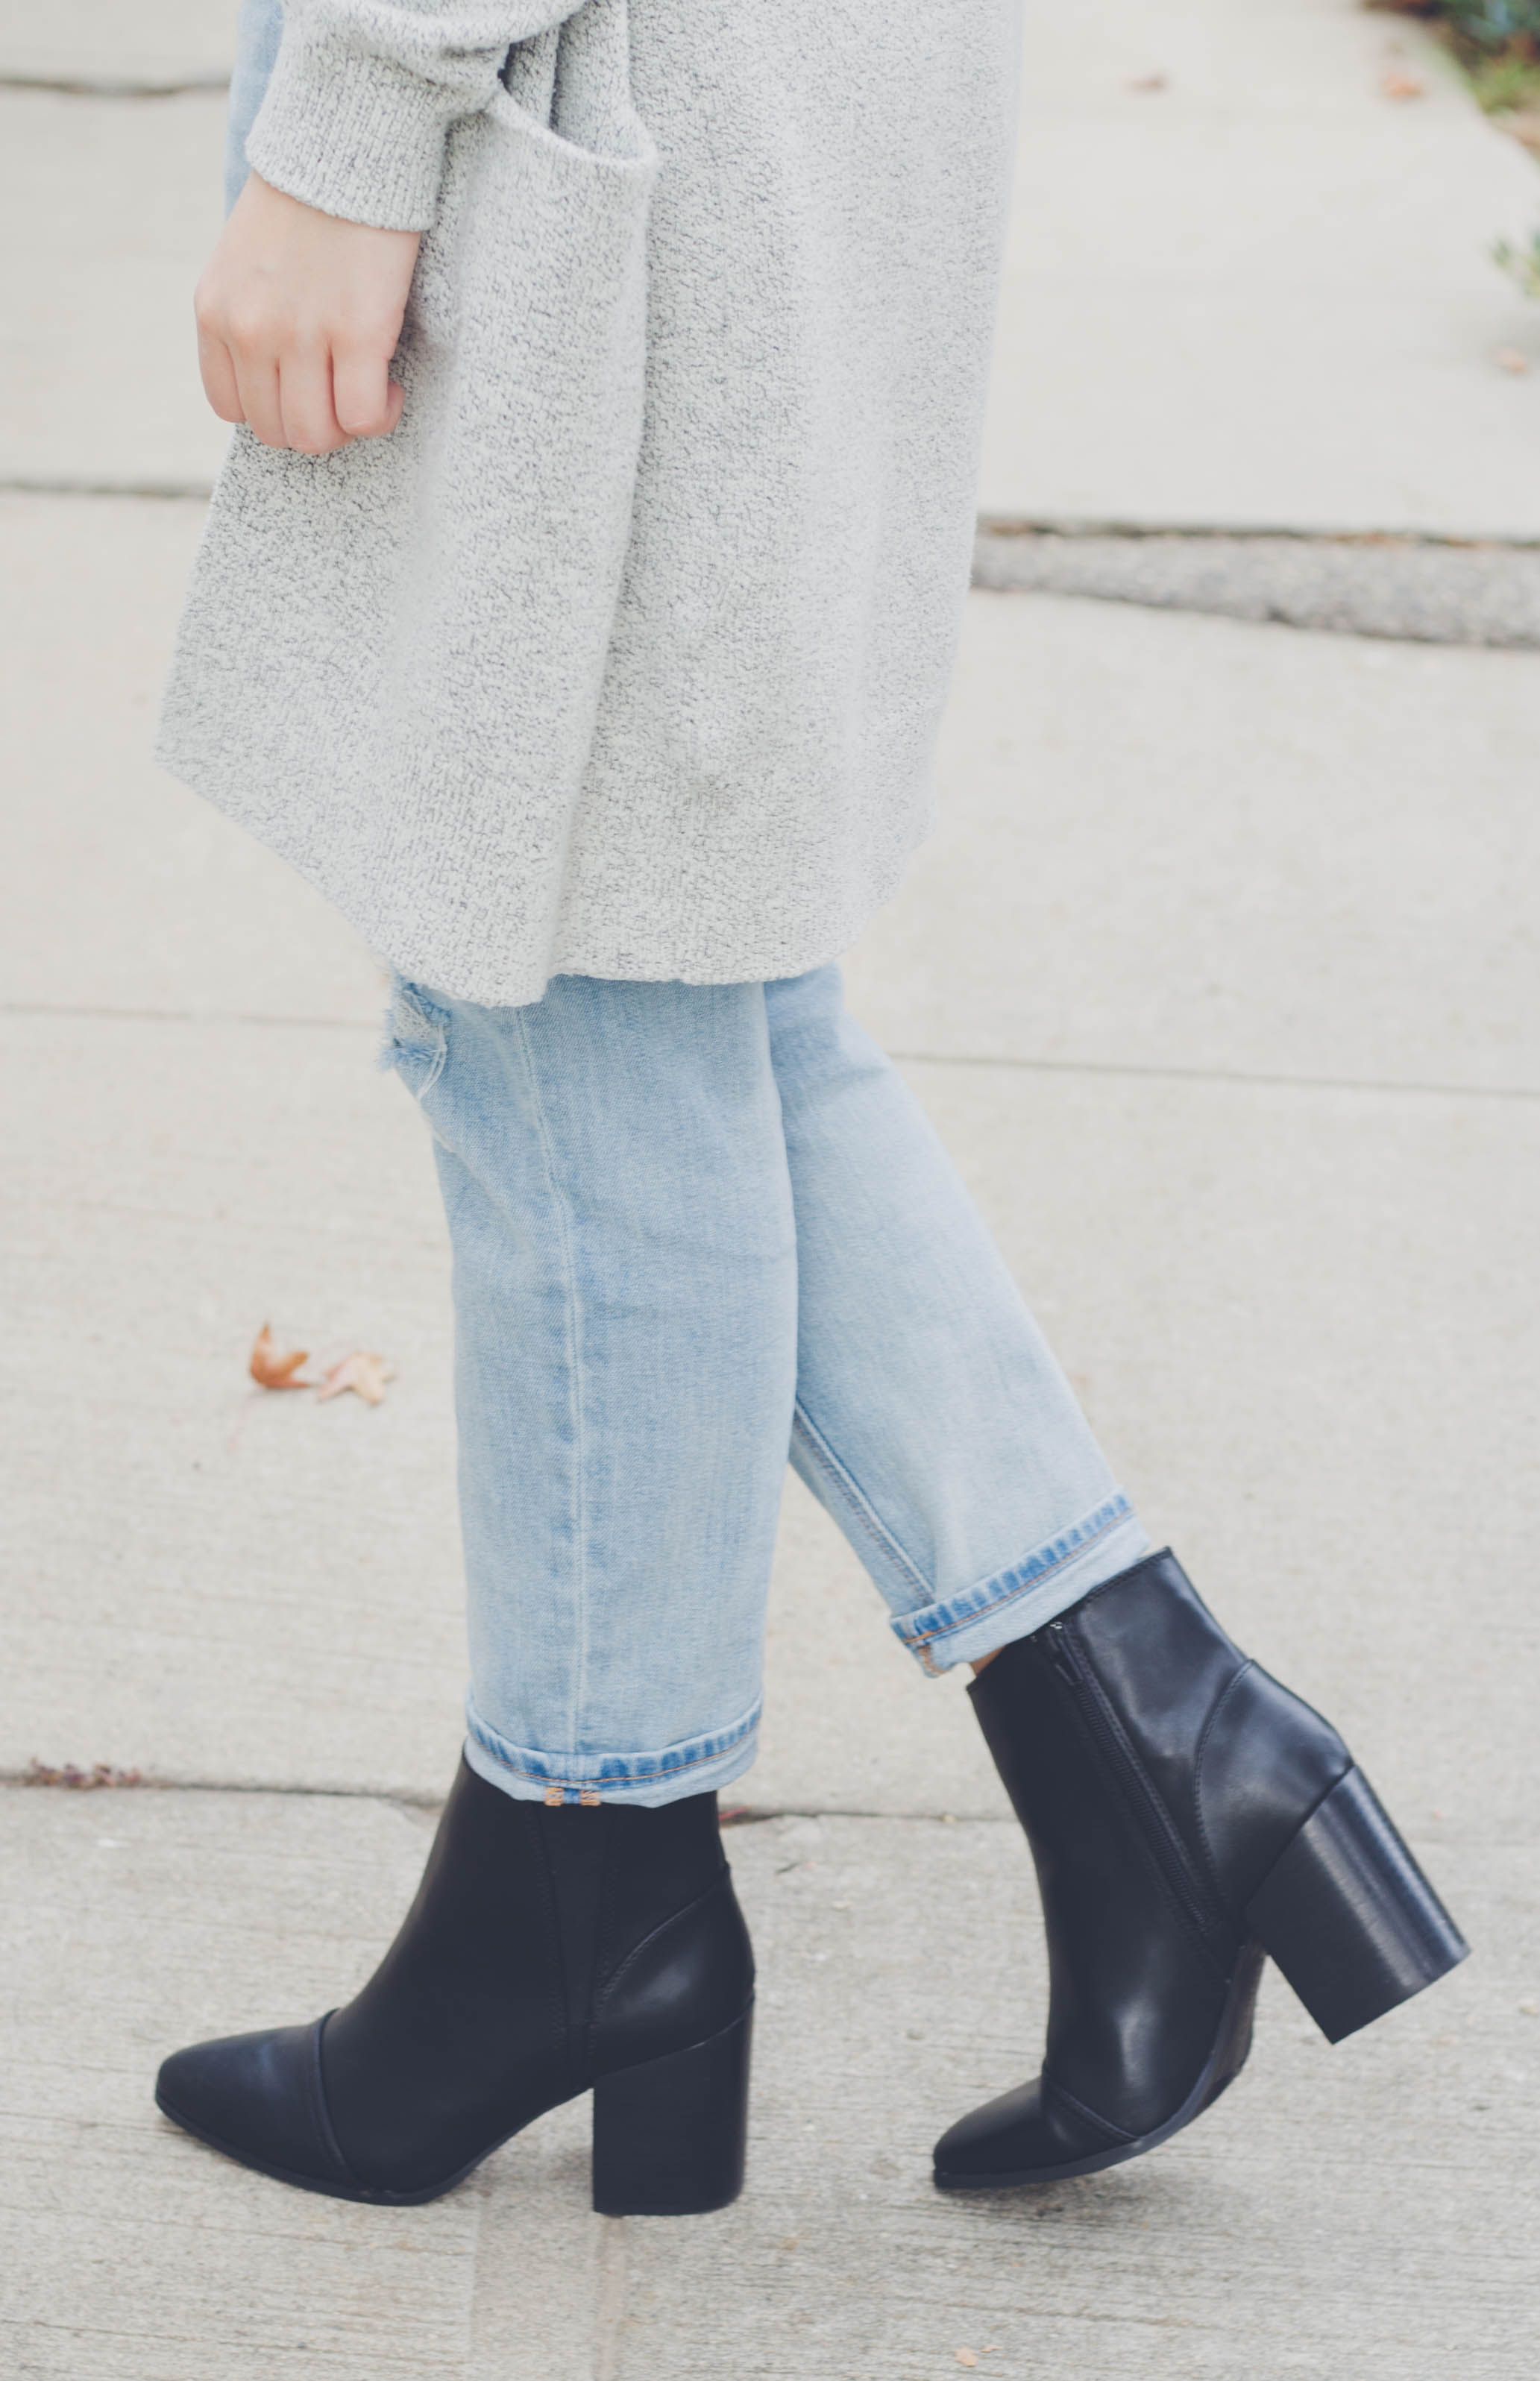 All About Vintage Jeans | Twinspiration 